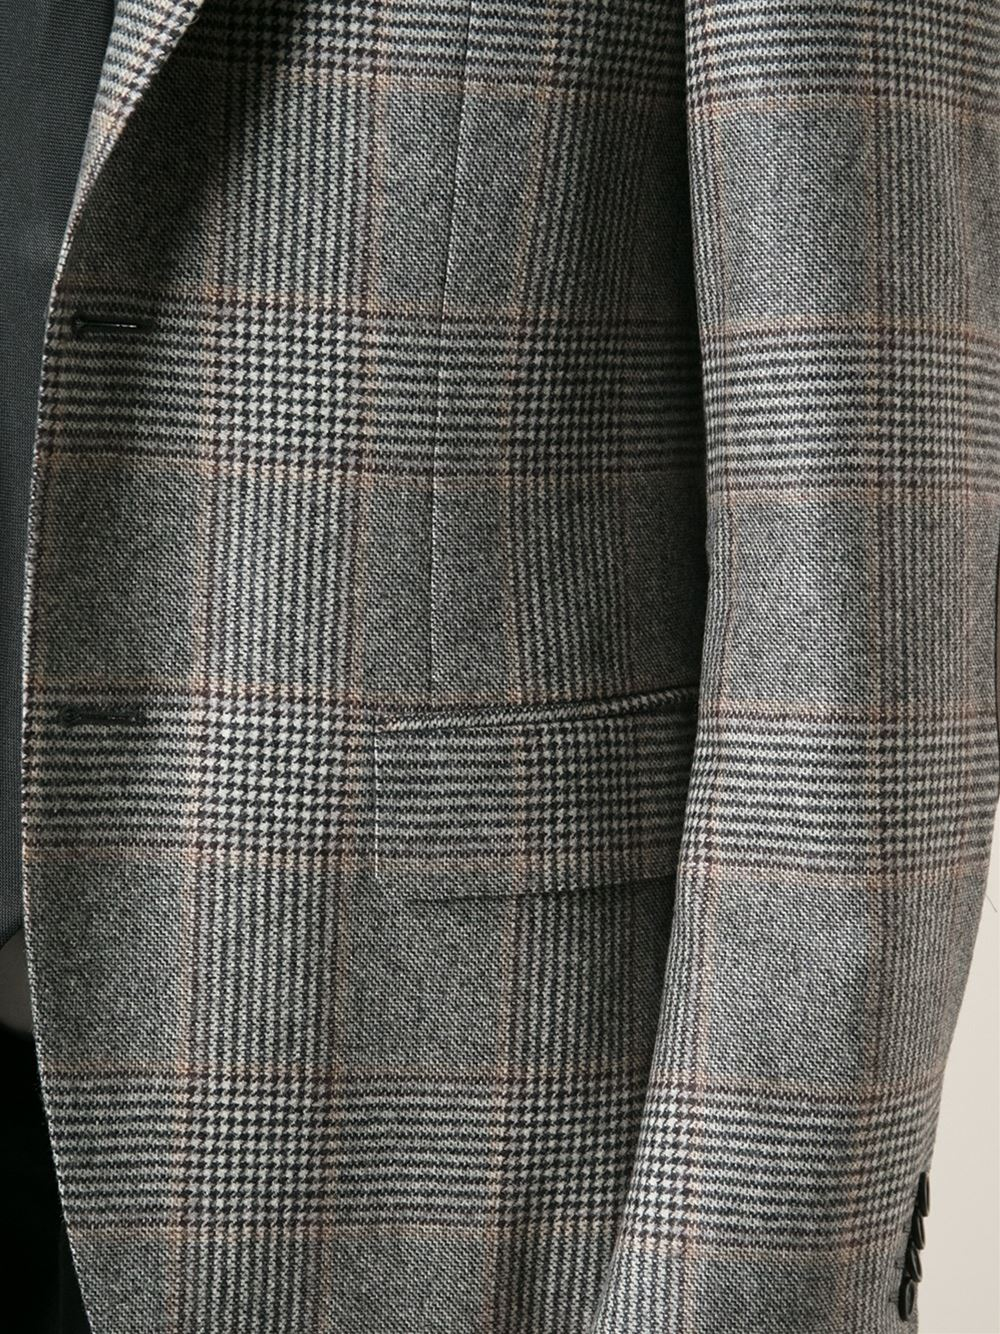 Lyst - Canali Prince Of Wales Check Blazer in Gray for Men